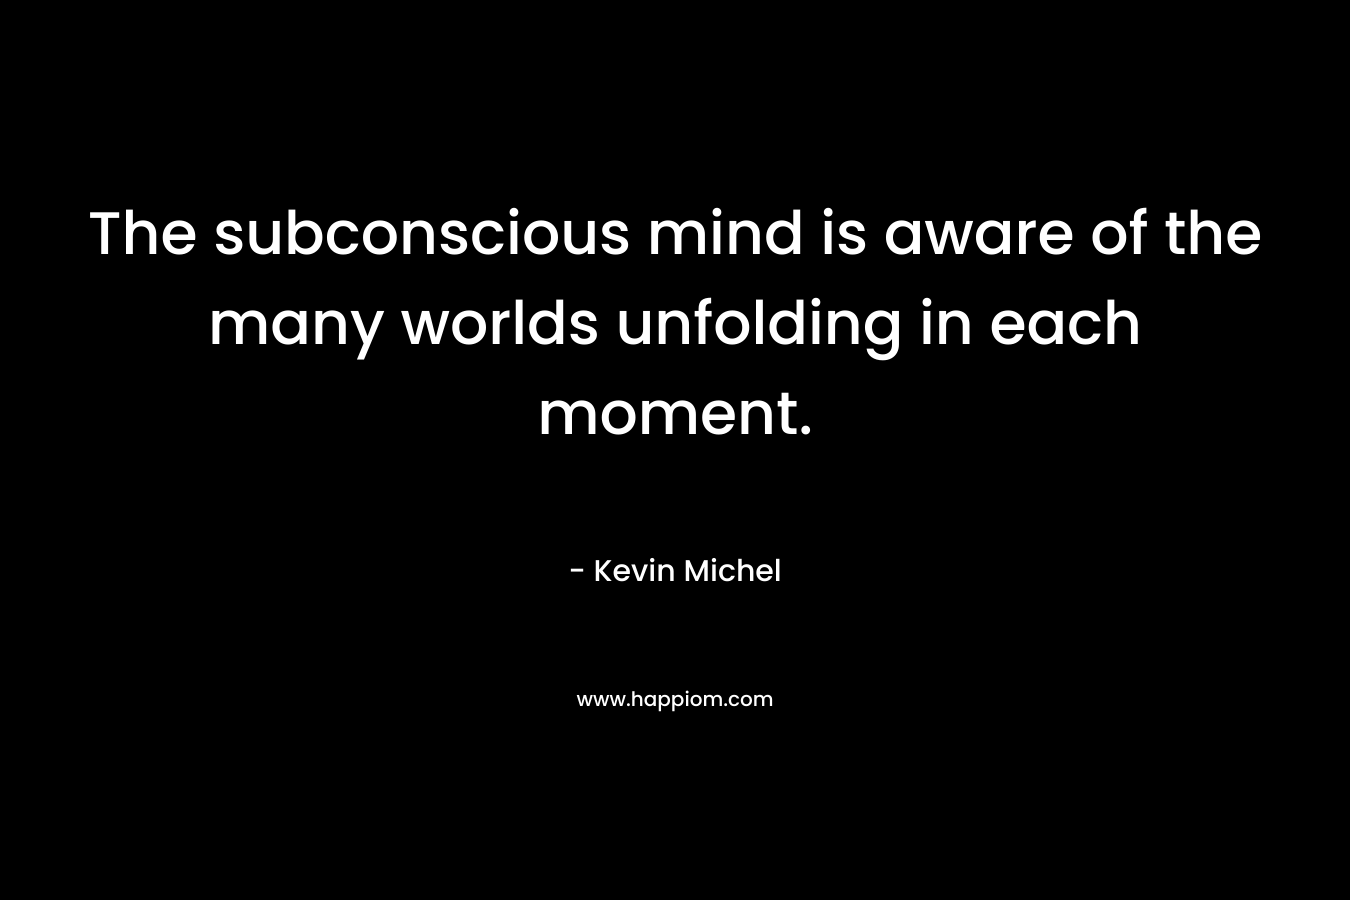 The subconscious mind is aware of the many worlds unfolding in each moment.